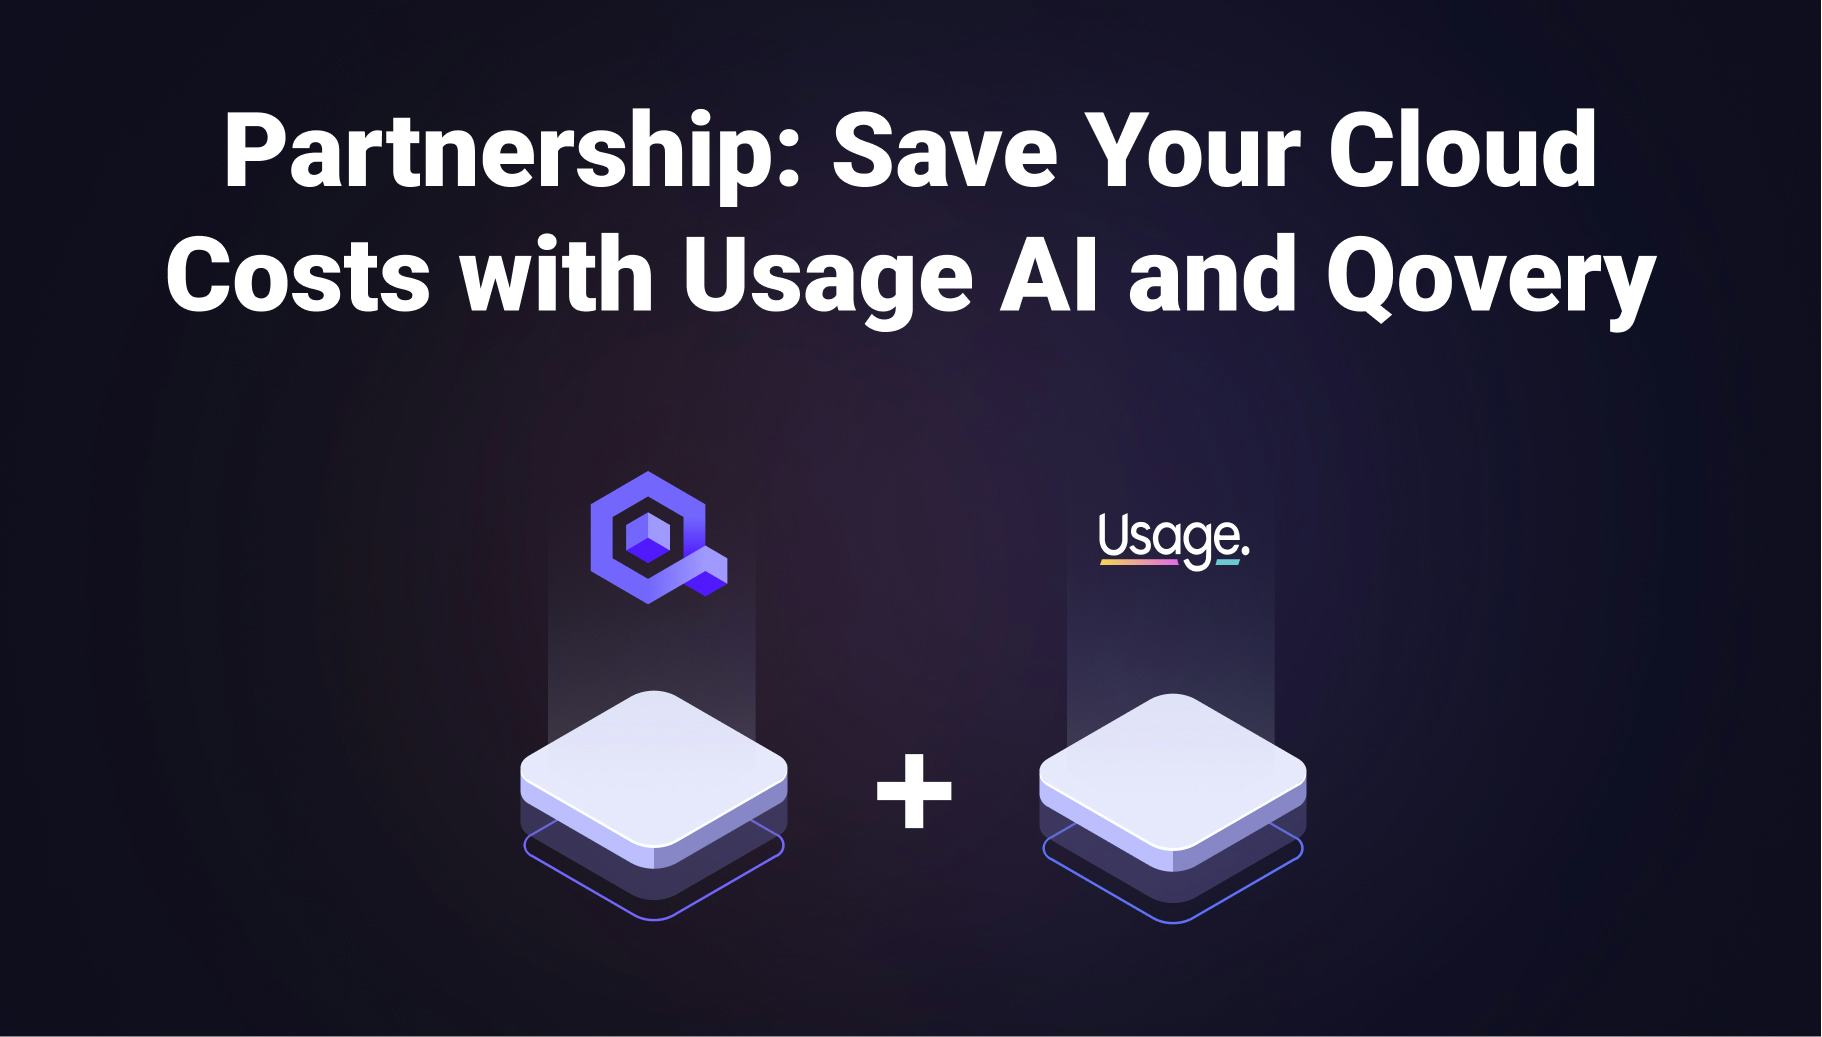 Partnership: Save Your Cloud Costs with Usage AI and Qovery